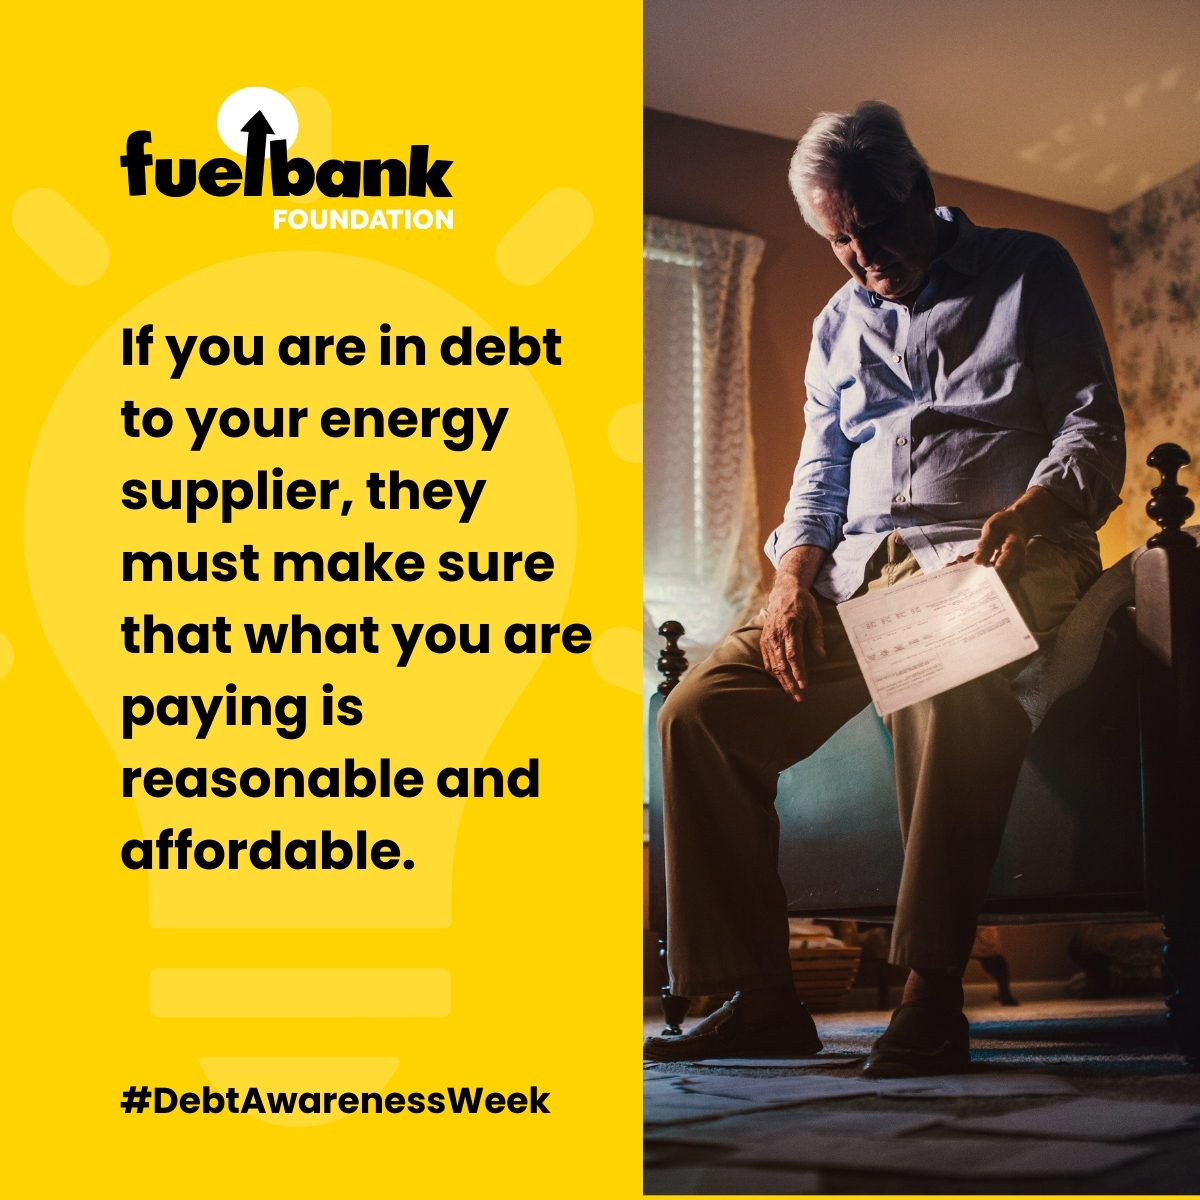 If you’re struggling to afford your energy bills, speak to your supplier to discuss a suitable repayment plan. Suppliers have an obligation to help you come to a solution that works for both of you. #DebtAwarenessWeek #EnergyBills